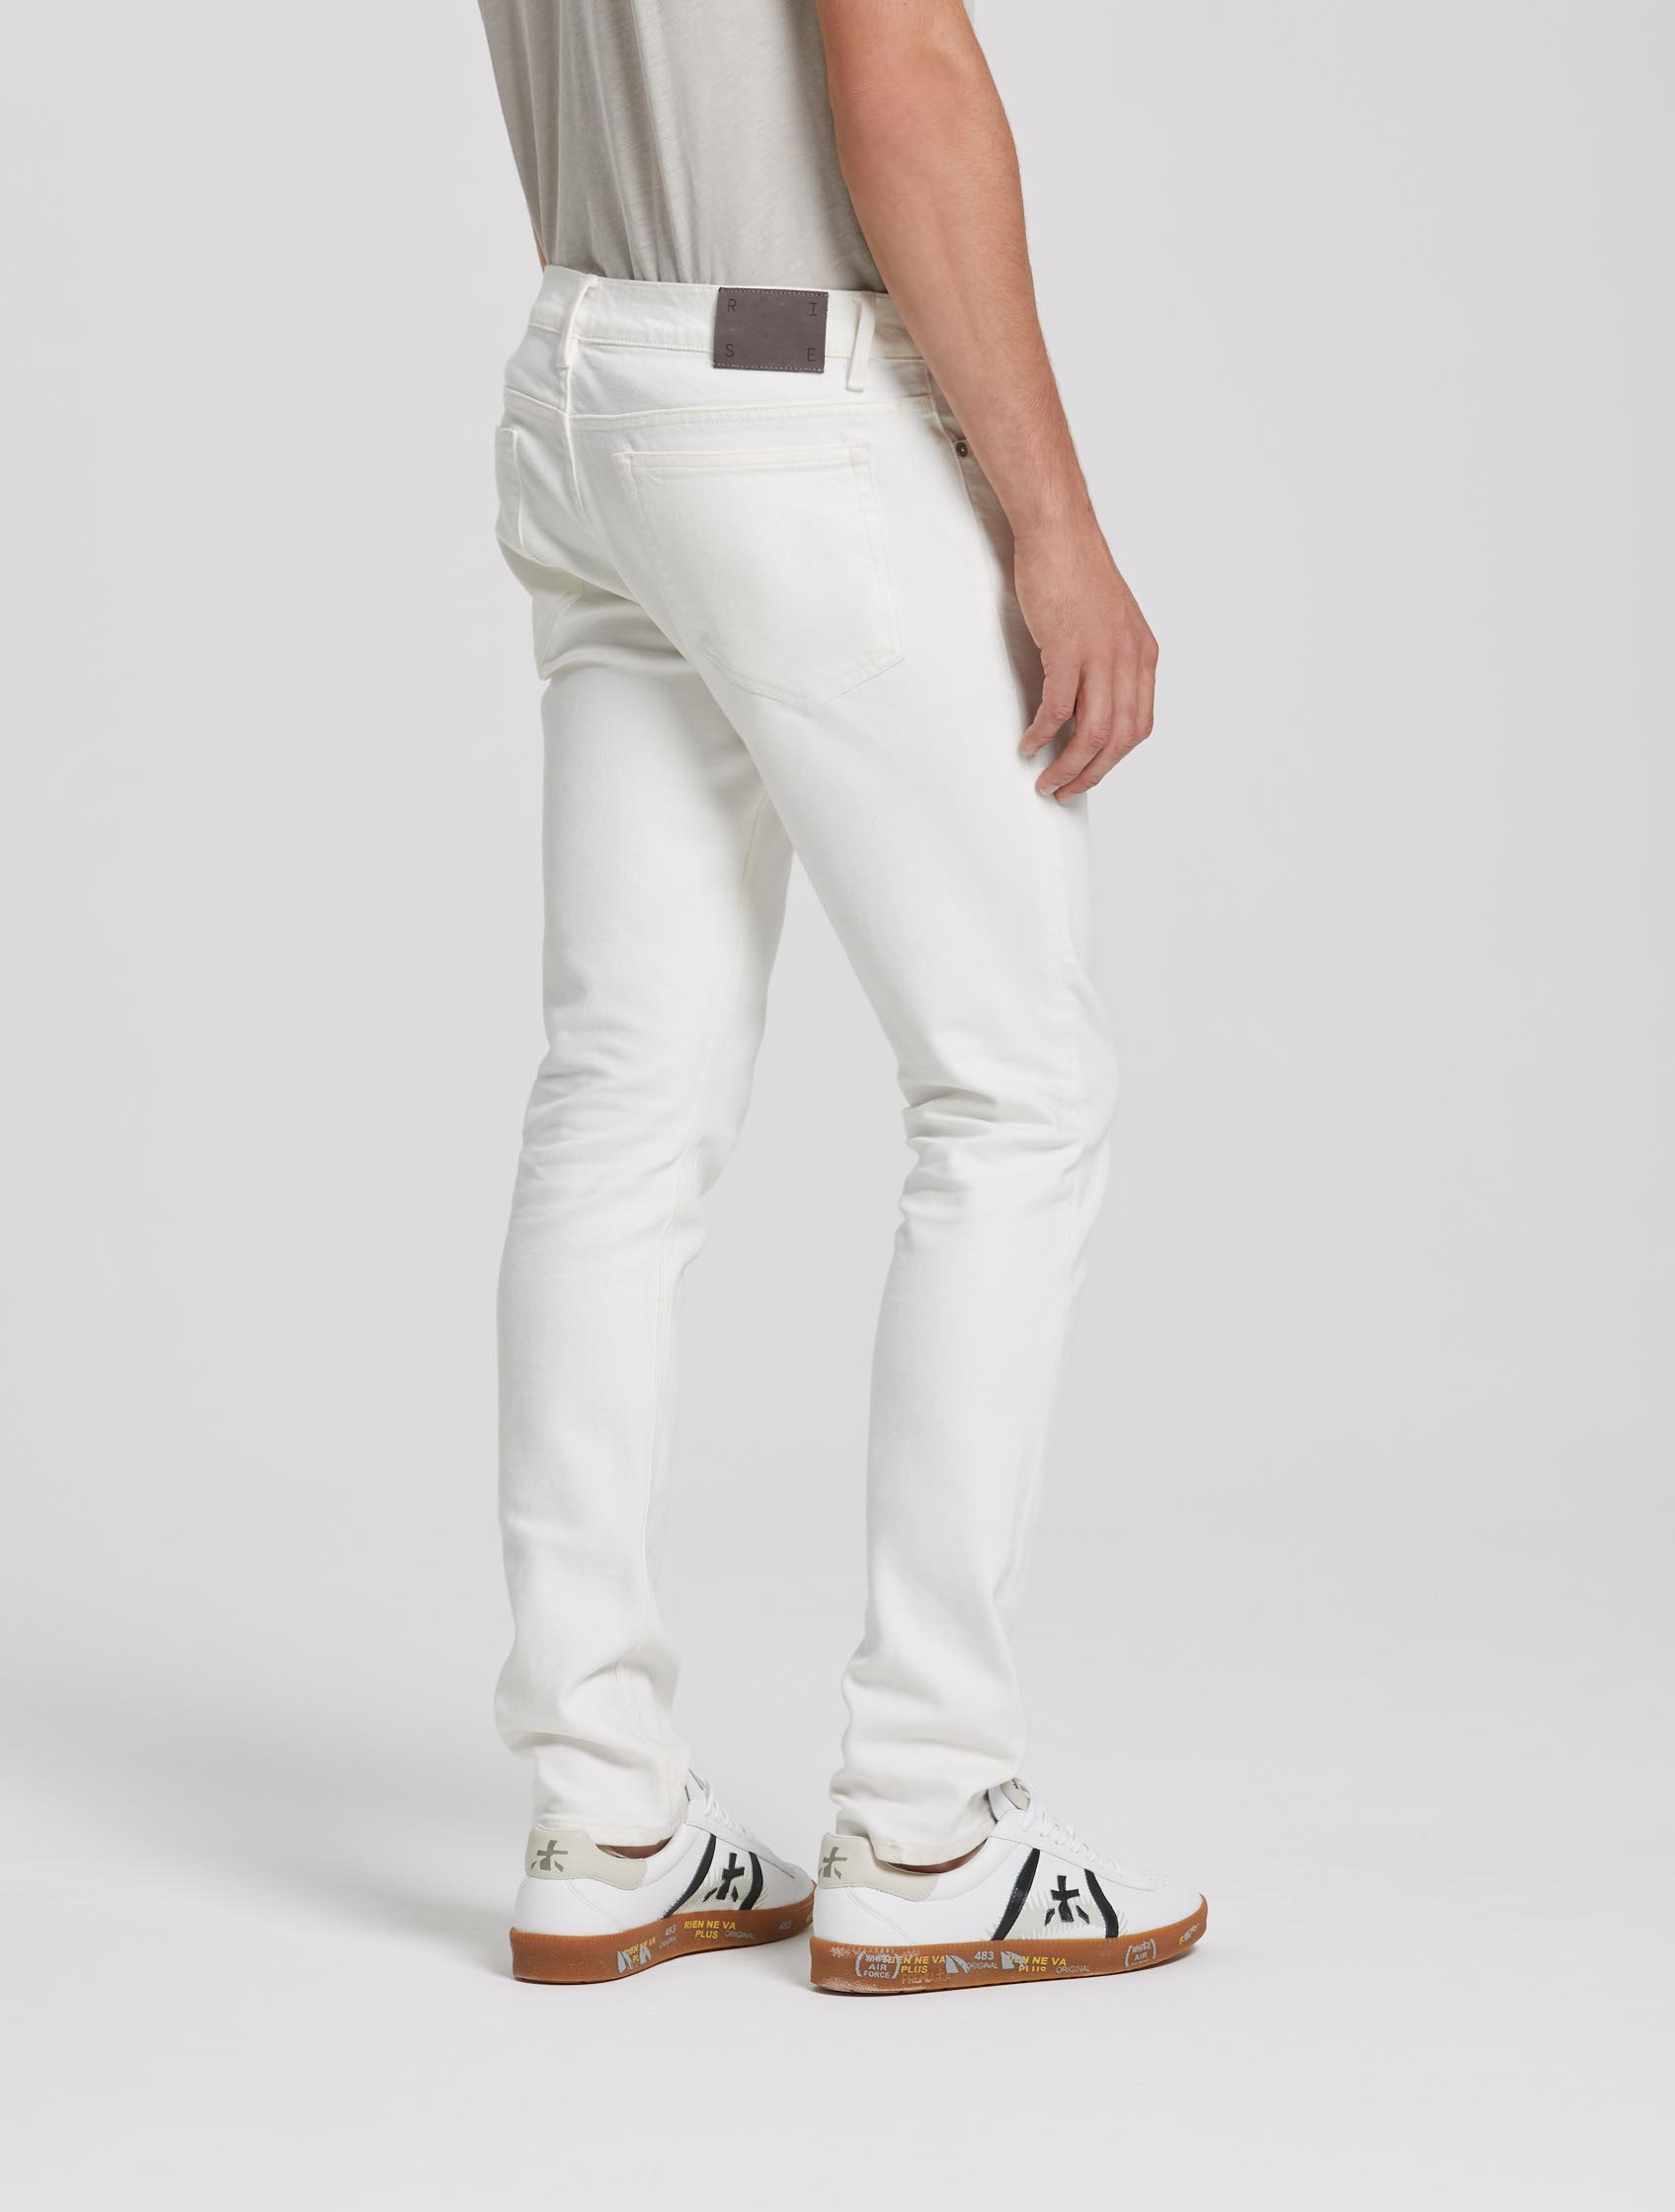 rise_jean-madison-off-white_34-30-2024__picture-6157